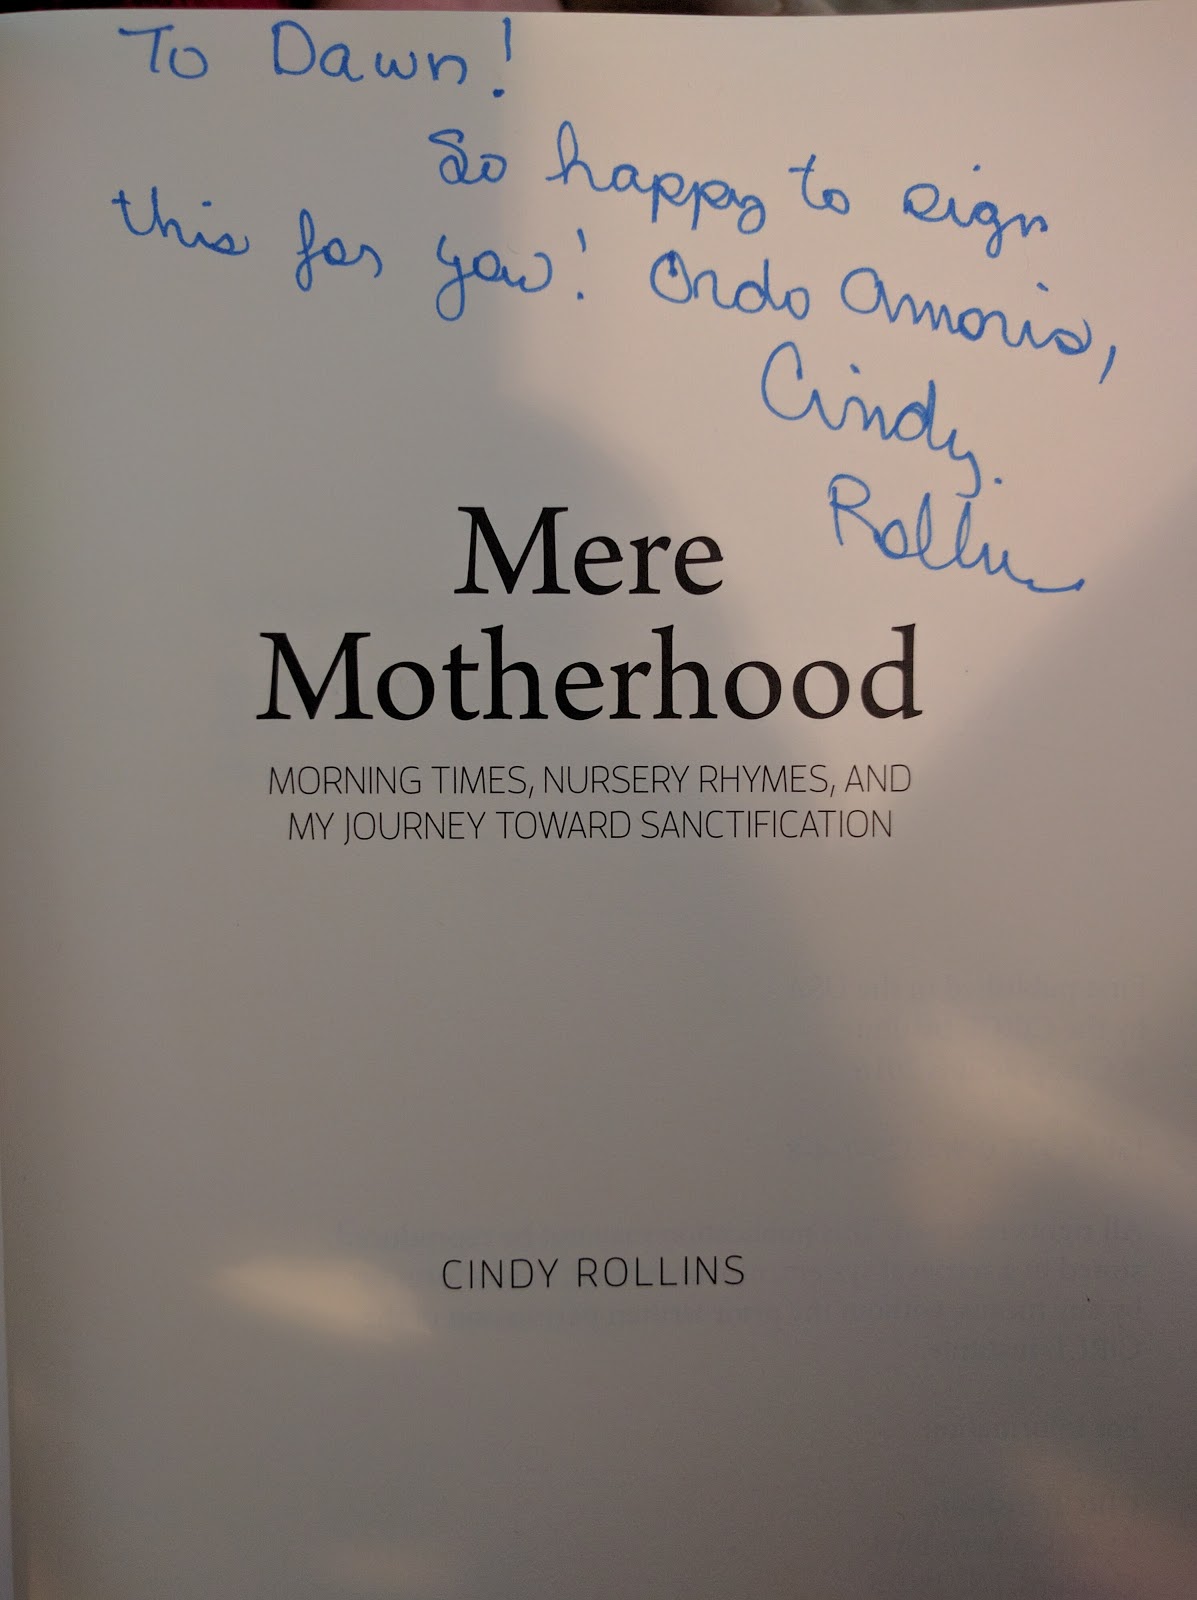 Book Review: Mere Motherhood: Morning Times, Nursery Rhymes, and My Journey Toward Sanctification by Cindy Rollins